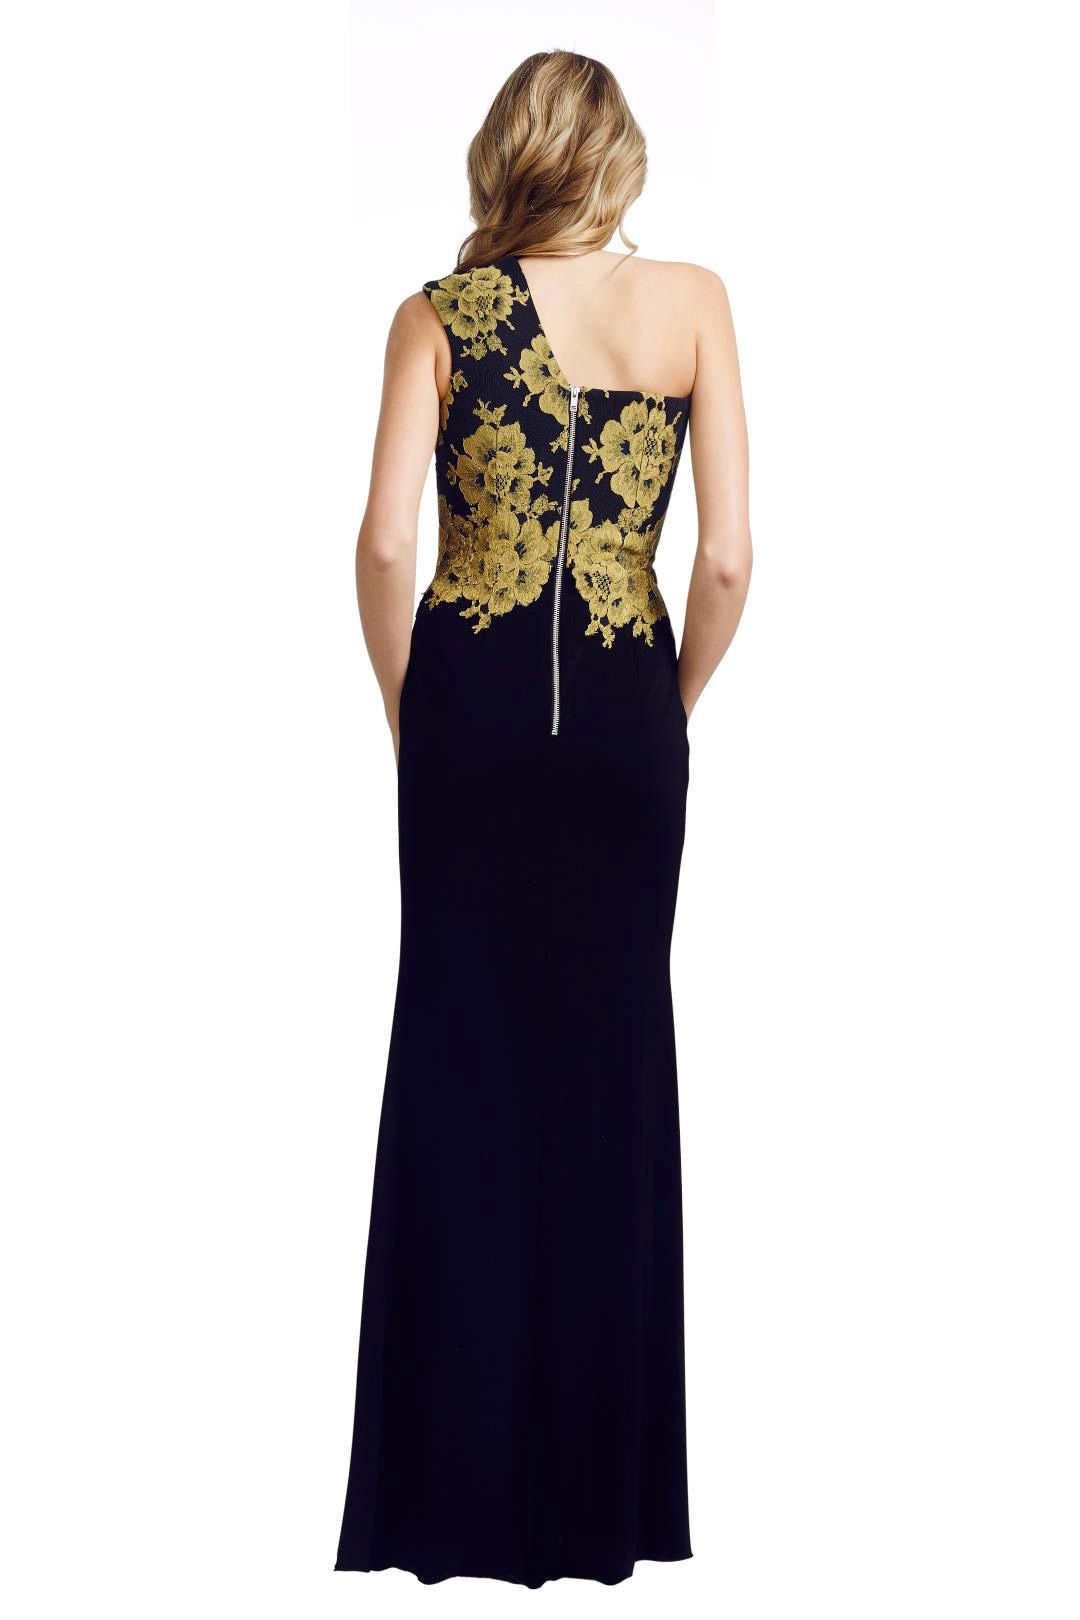 Alex Perry - Darcelle Gown - Black - Back